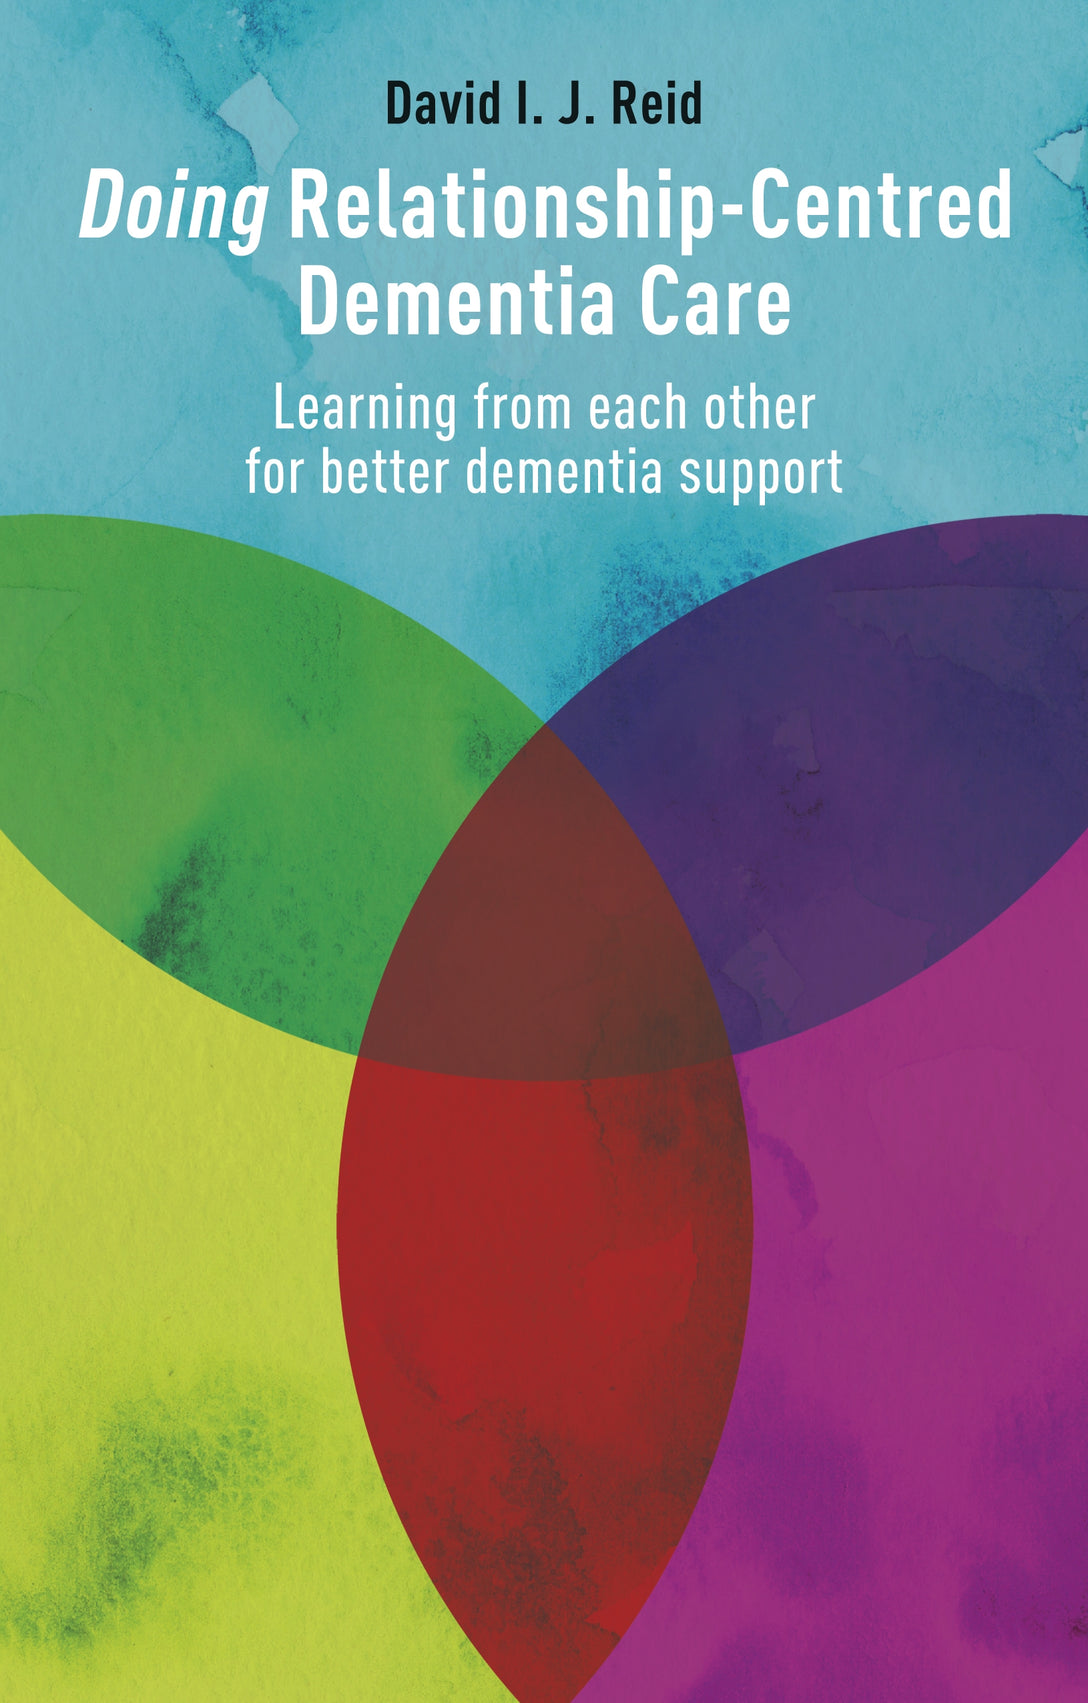 Doing Relationship-Centred Dementia Care by David I. J. Reid